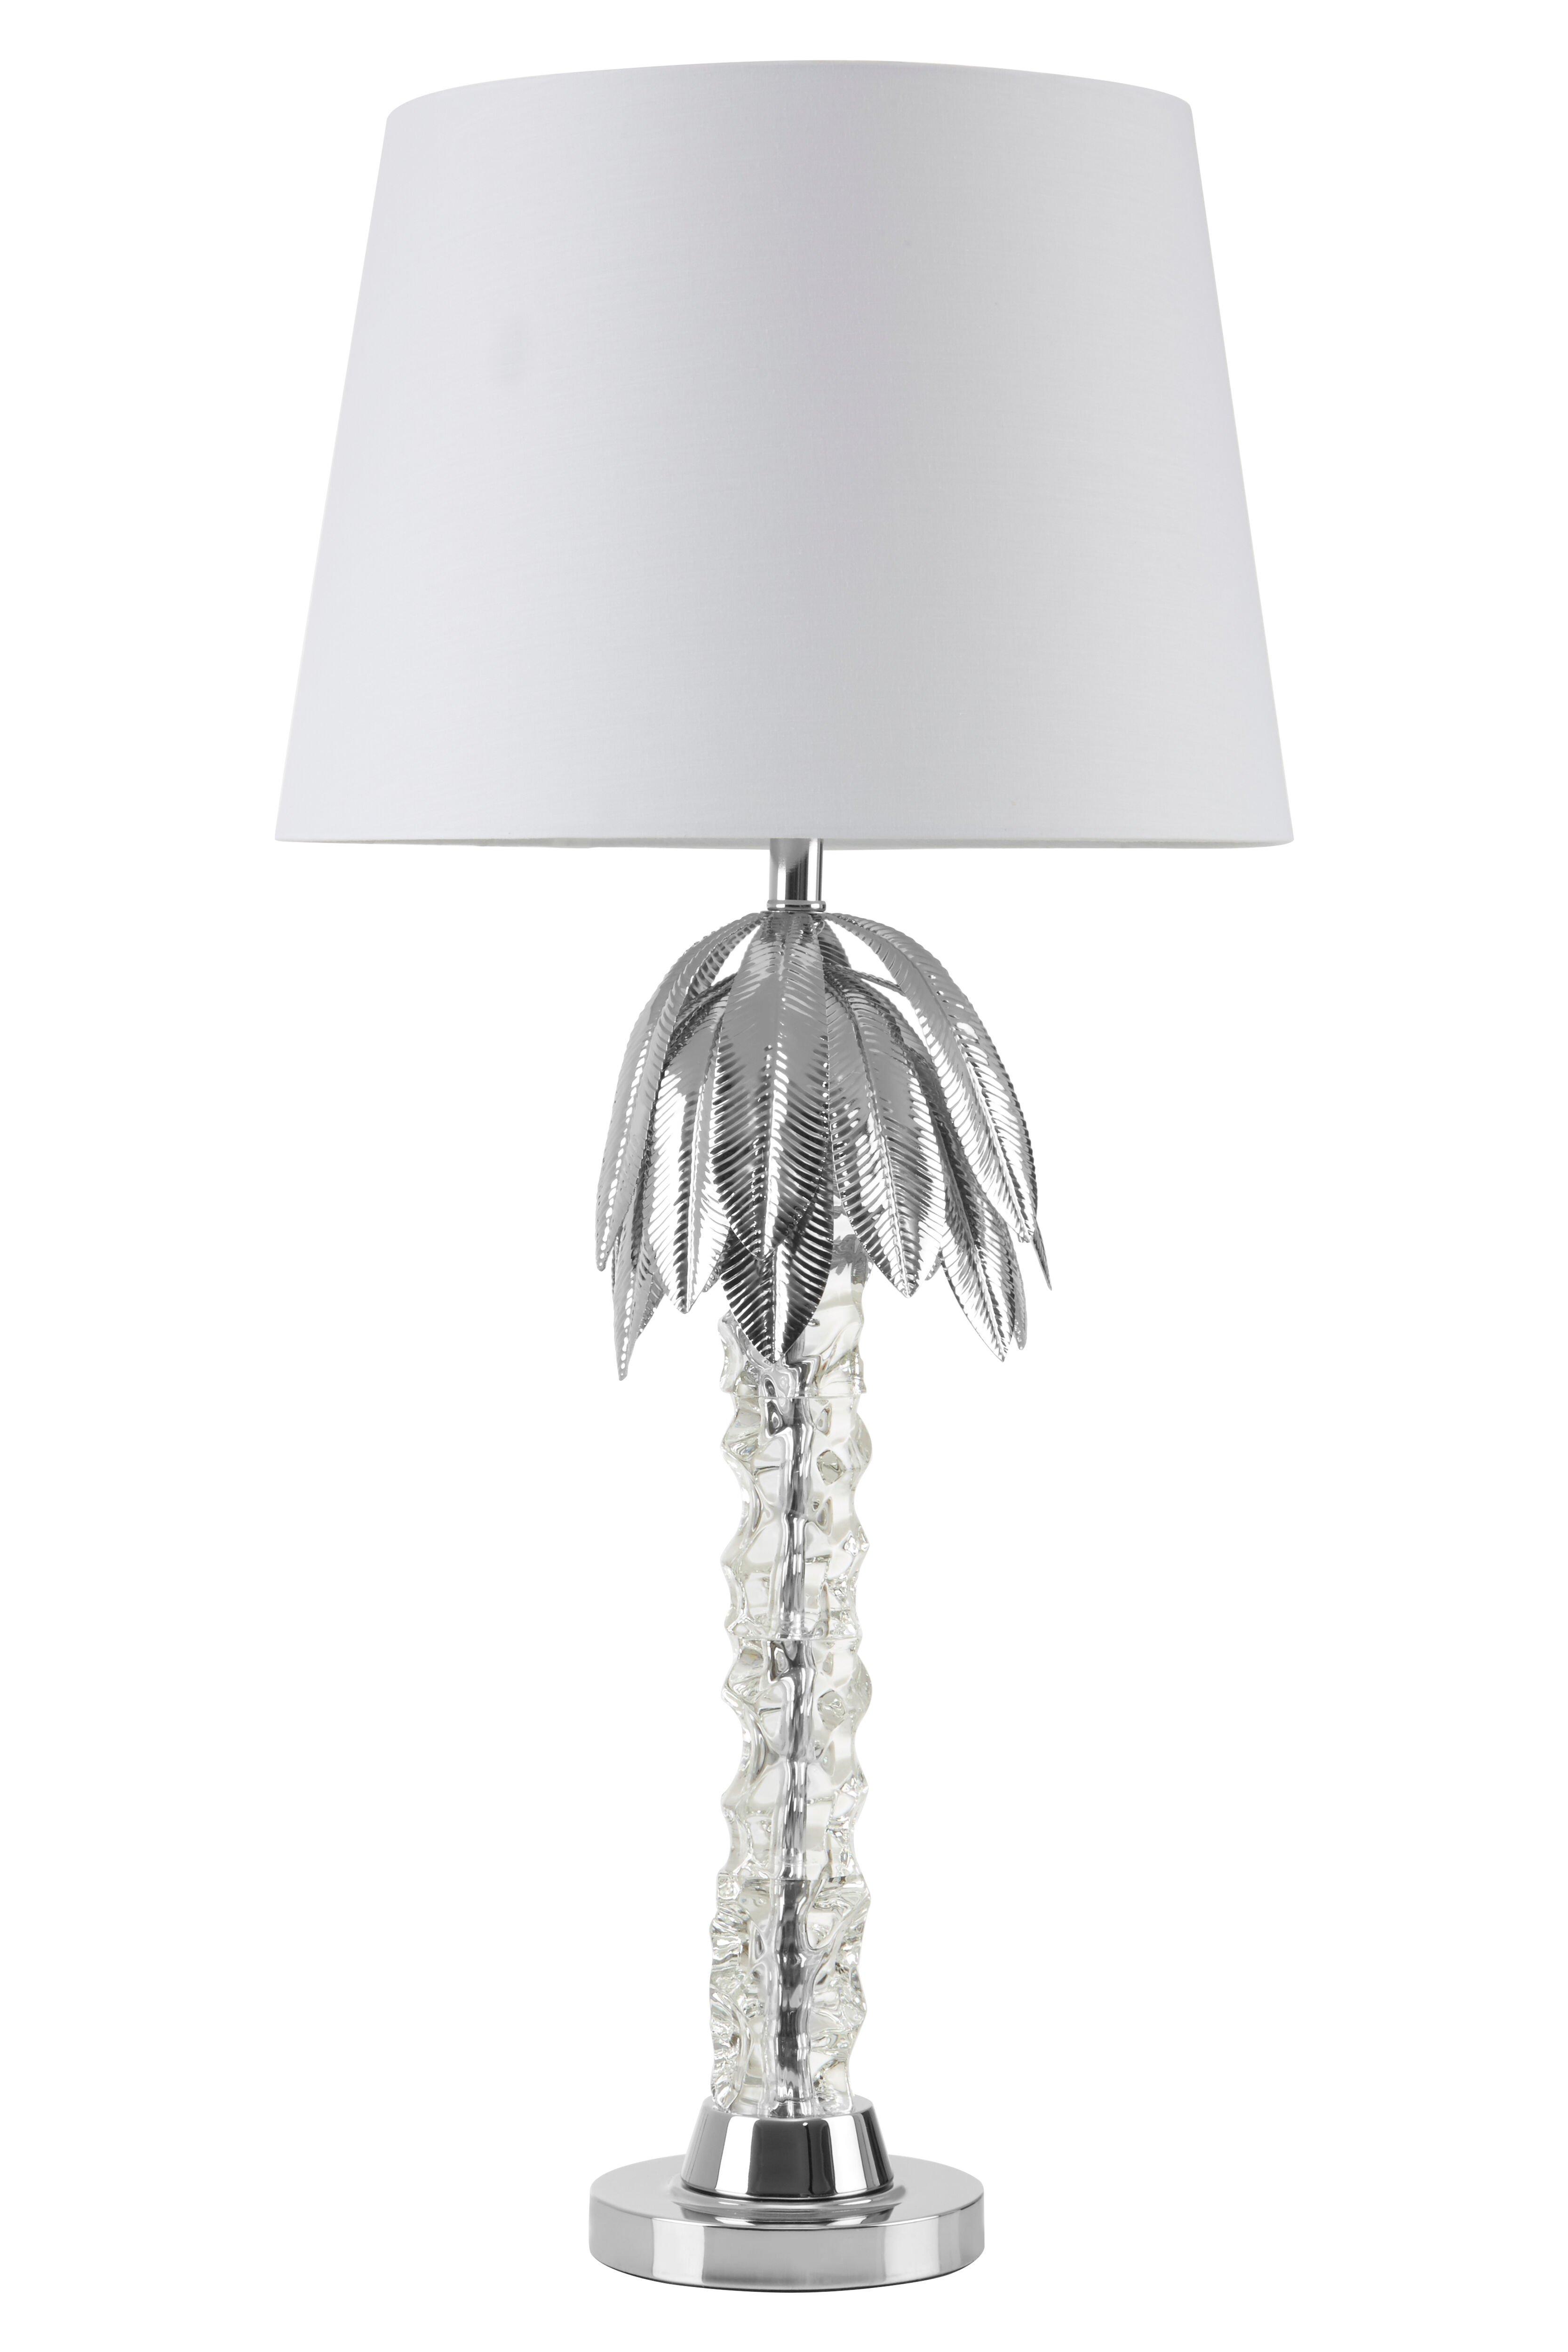 Interiors by Premier Halm Table Lamp